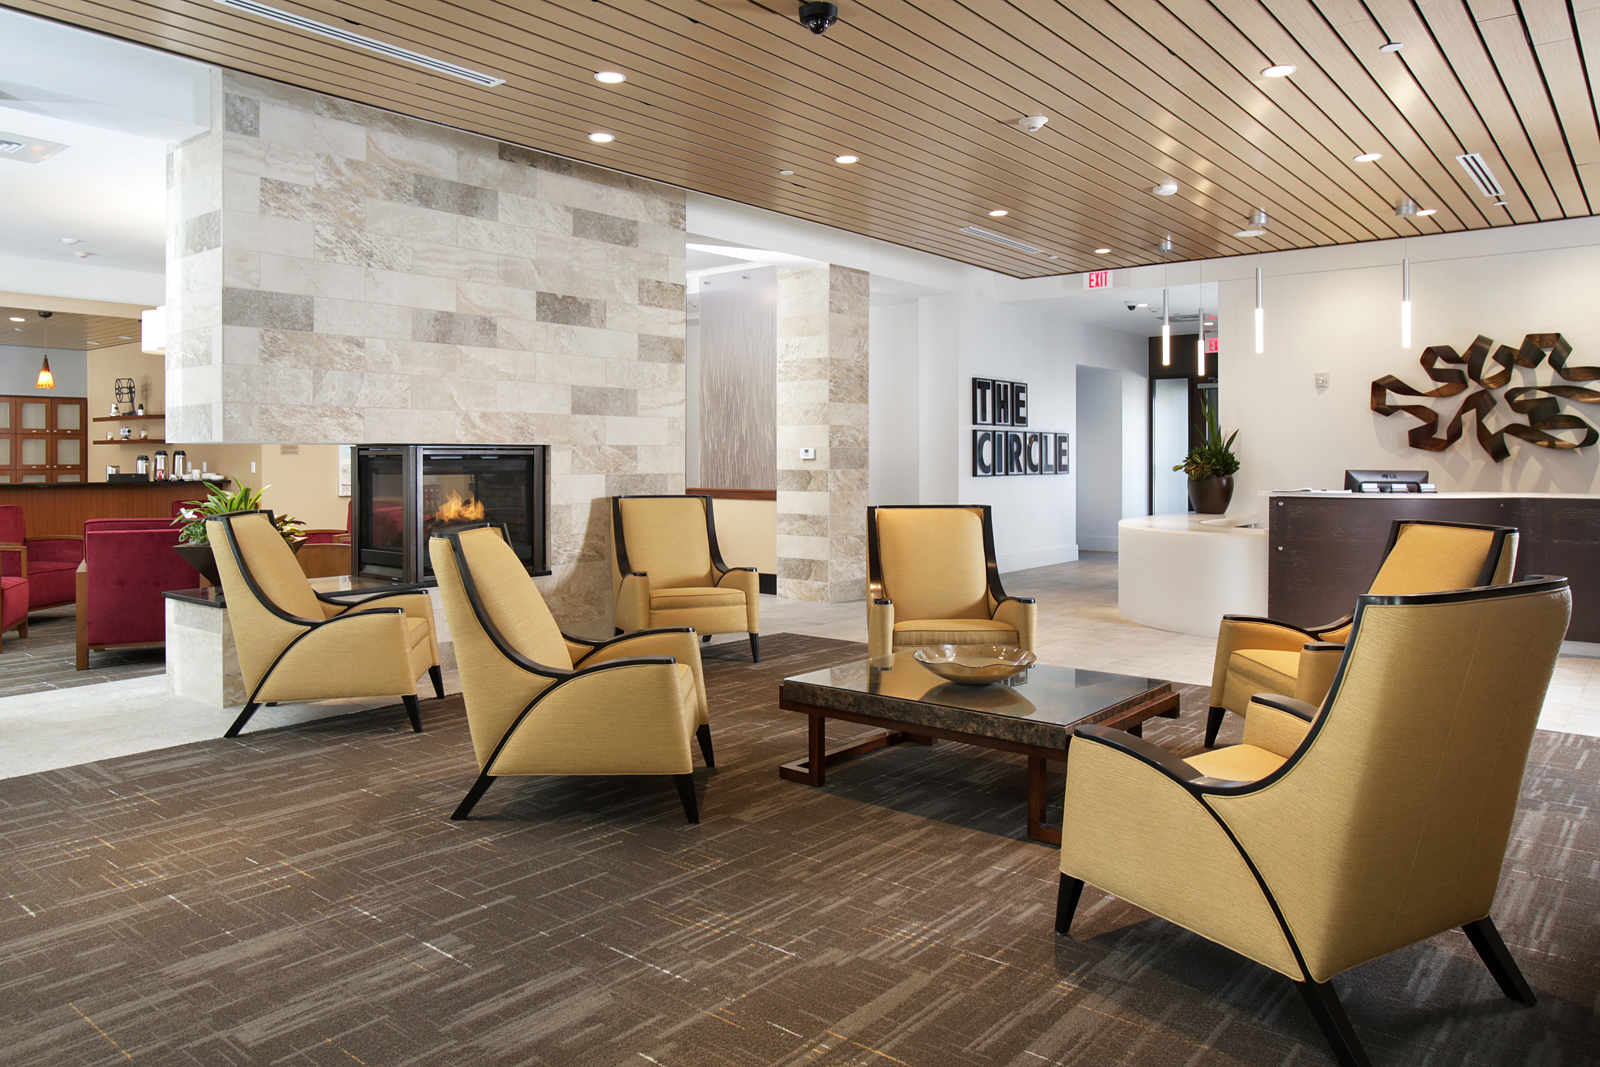 Our interior design for the lobby of an independent living community